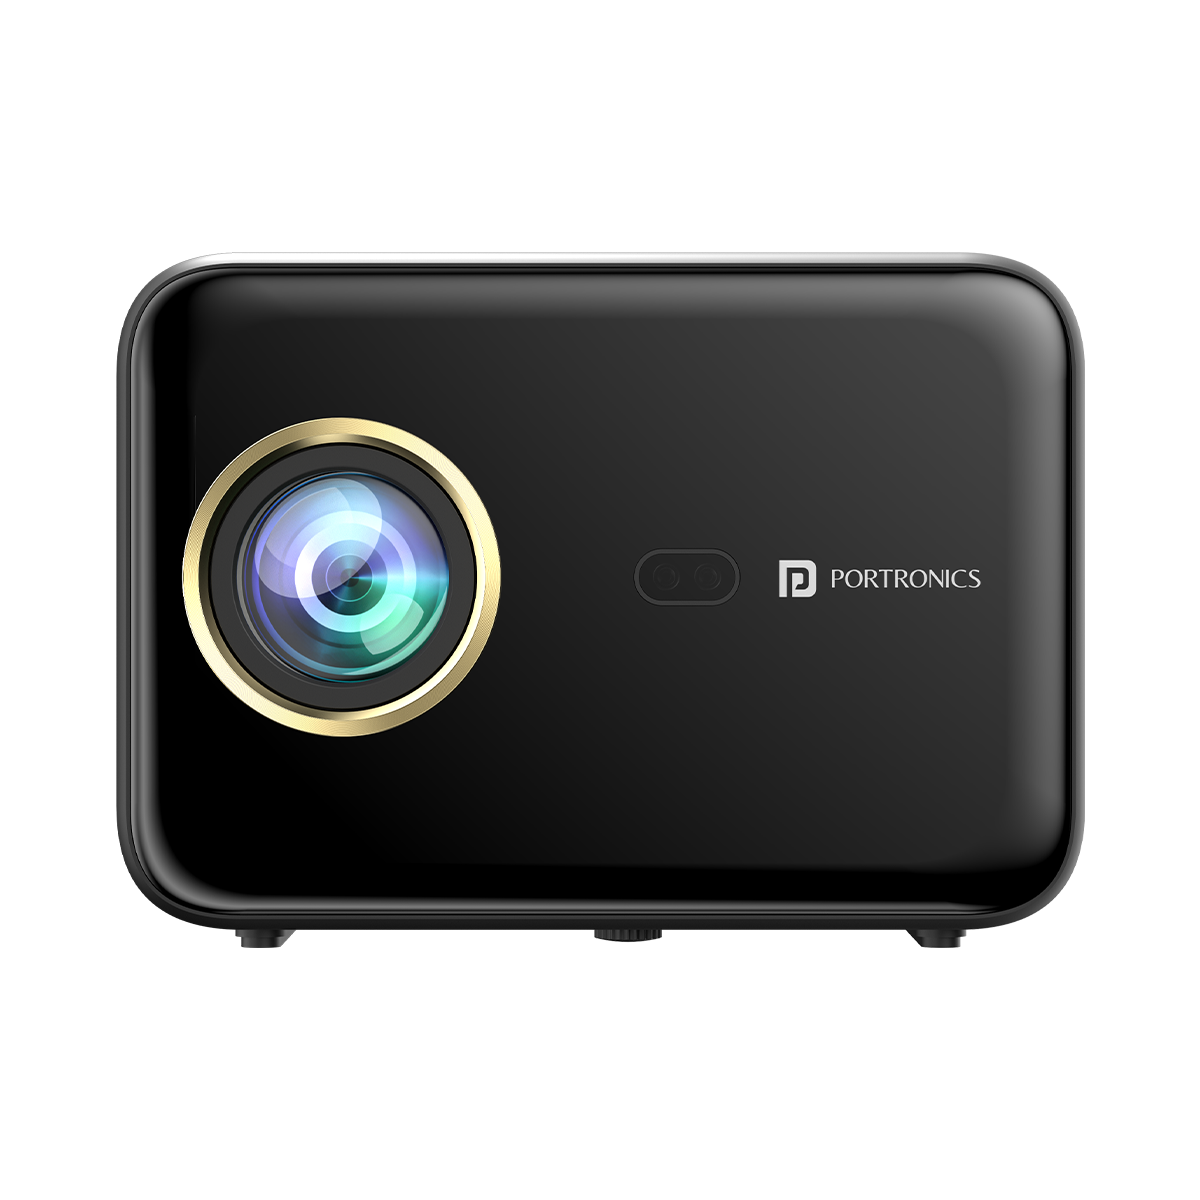 Beem 410 - Android Smart Projector